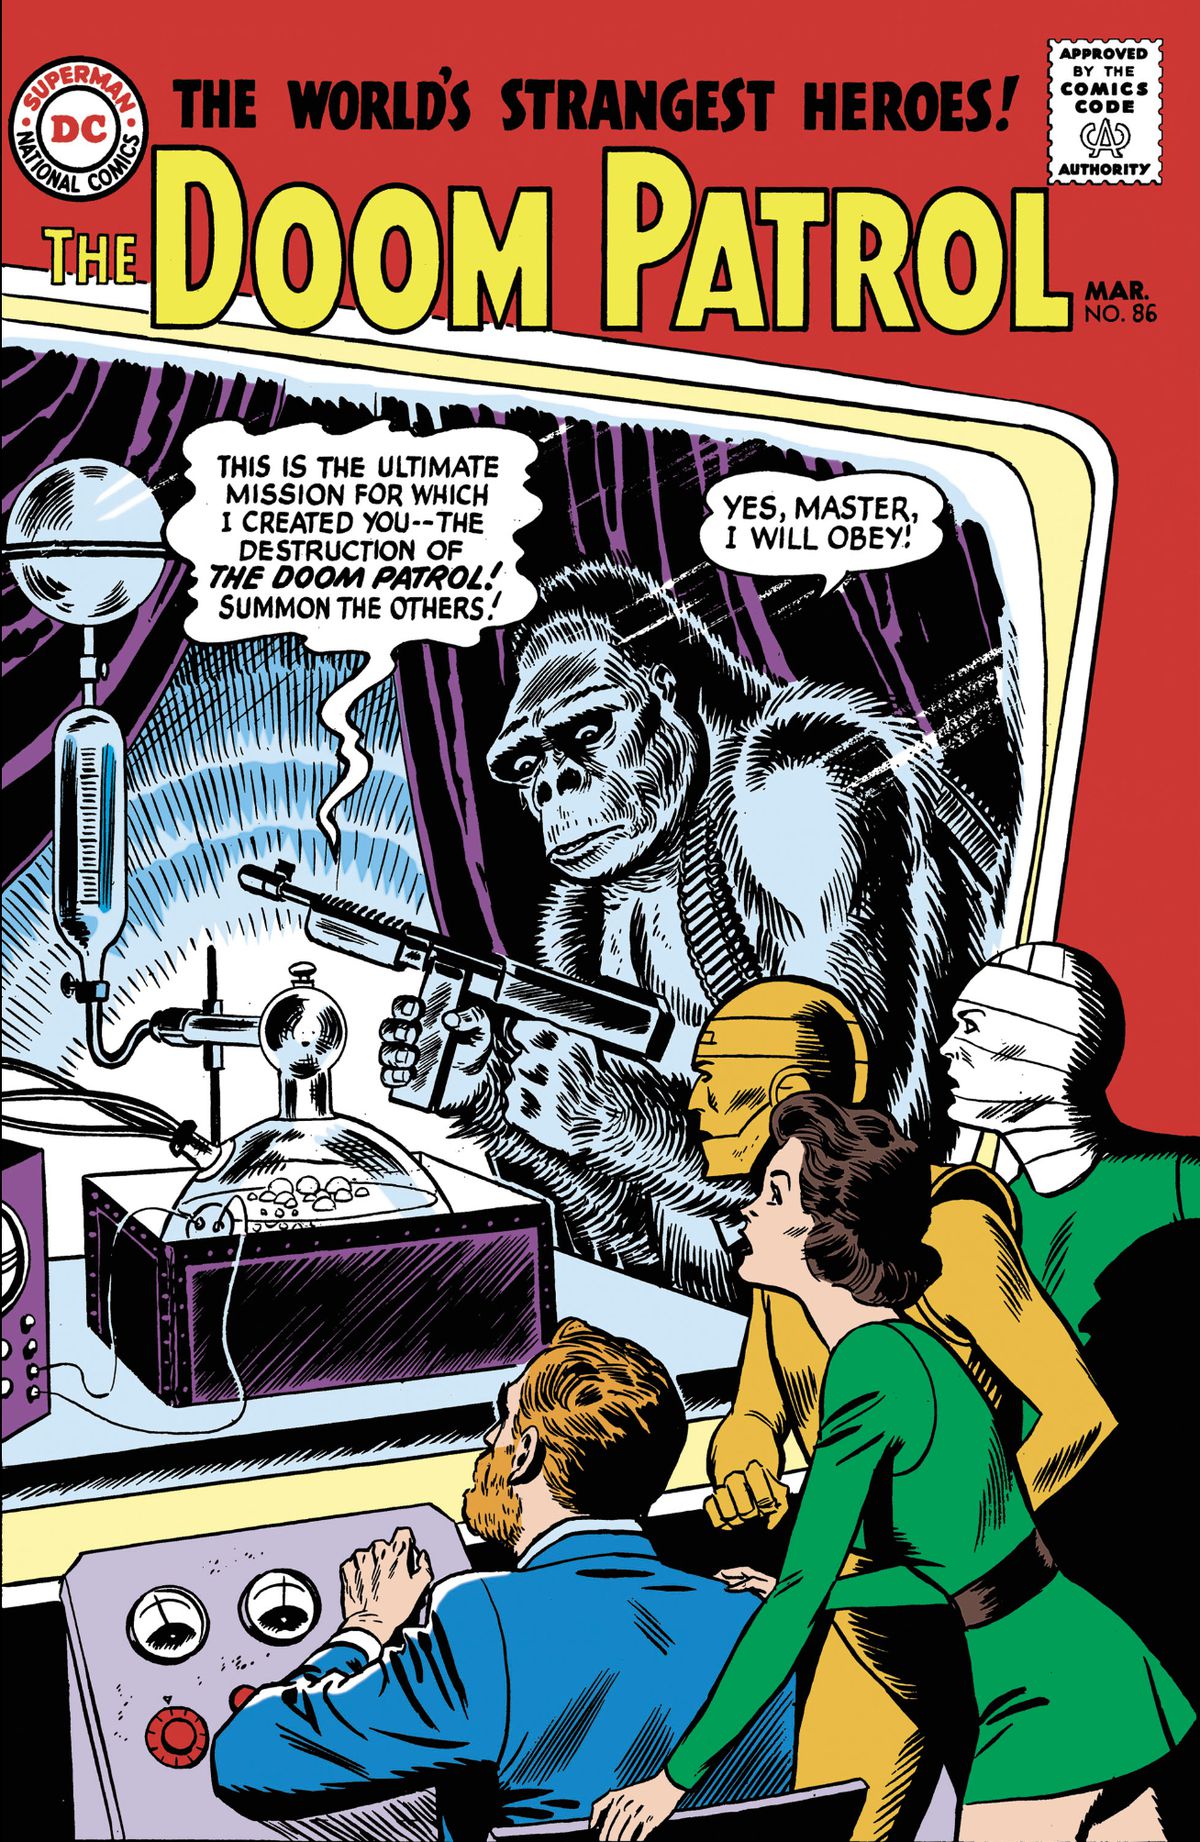 The Doom Patrol — paraplegic Dr. Caulder, Elastigirl, Robotman, and the Negative Man, look on as, on a giant TV screen, a gorilla with a machine gun takes orders from a brain in a jar on the cover of Doom Patrol #1 (1964). 